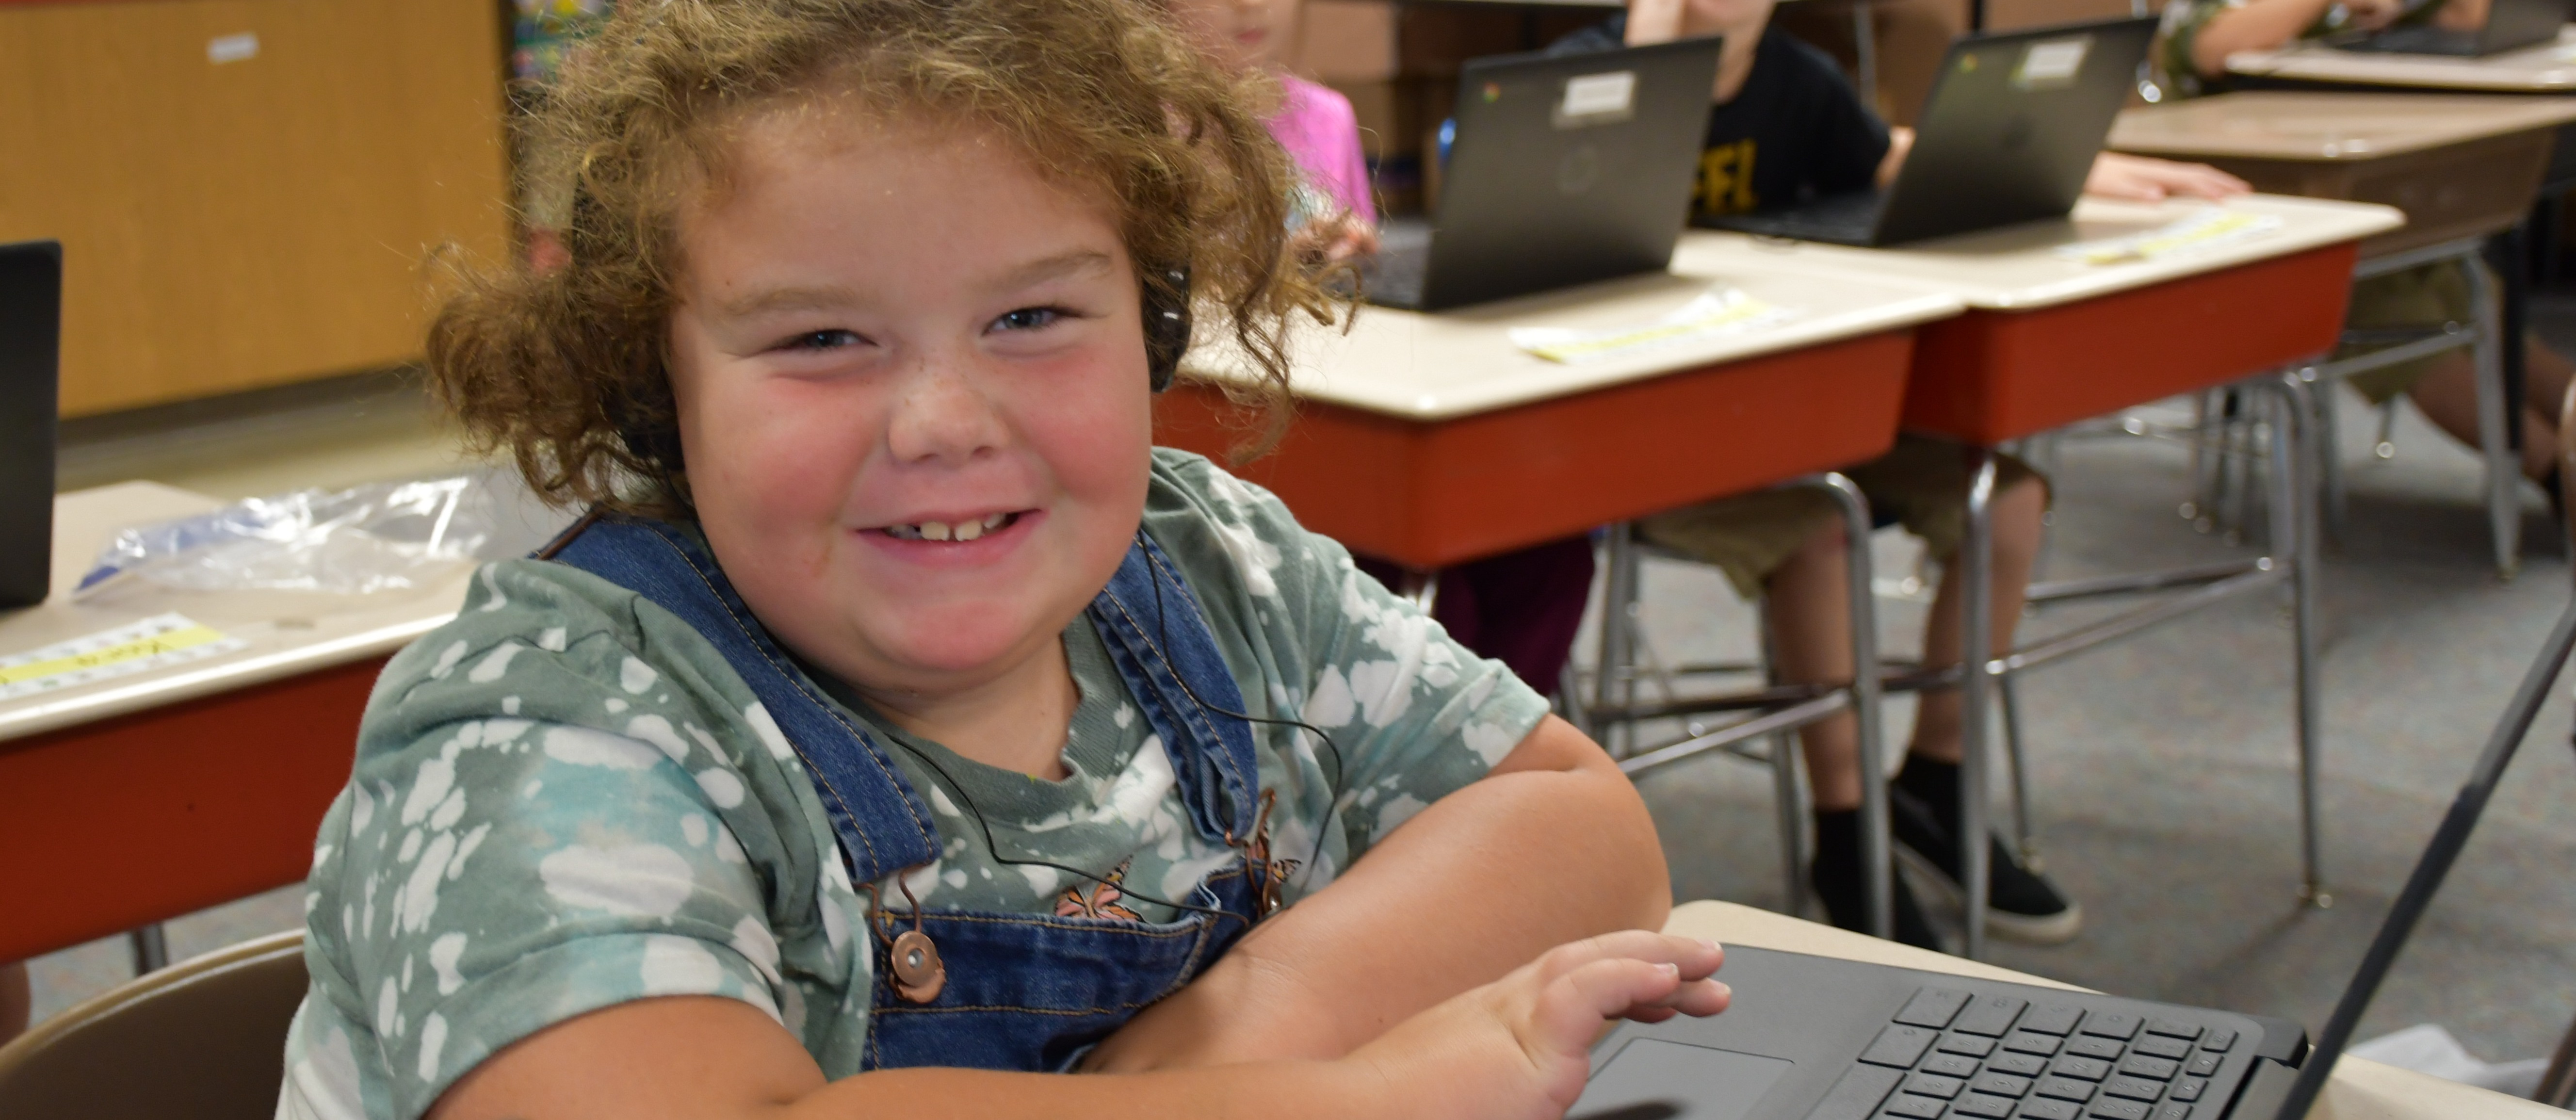 young girl looks up from her computer and smiles